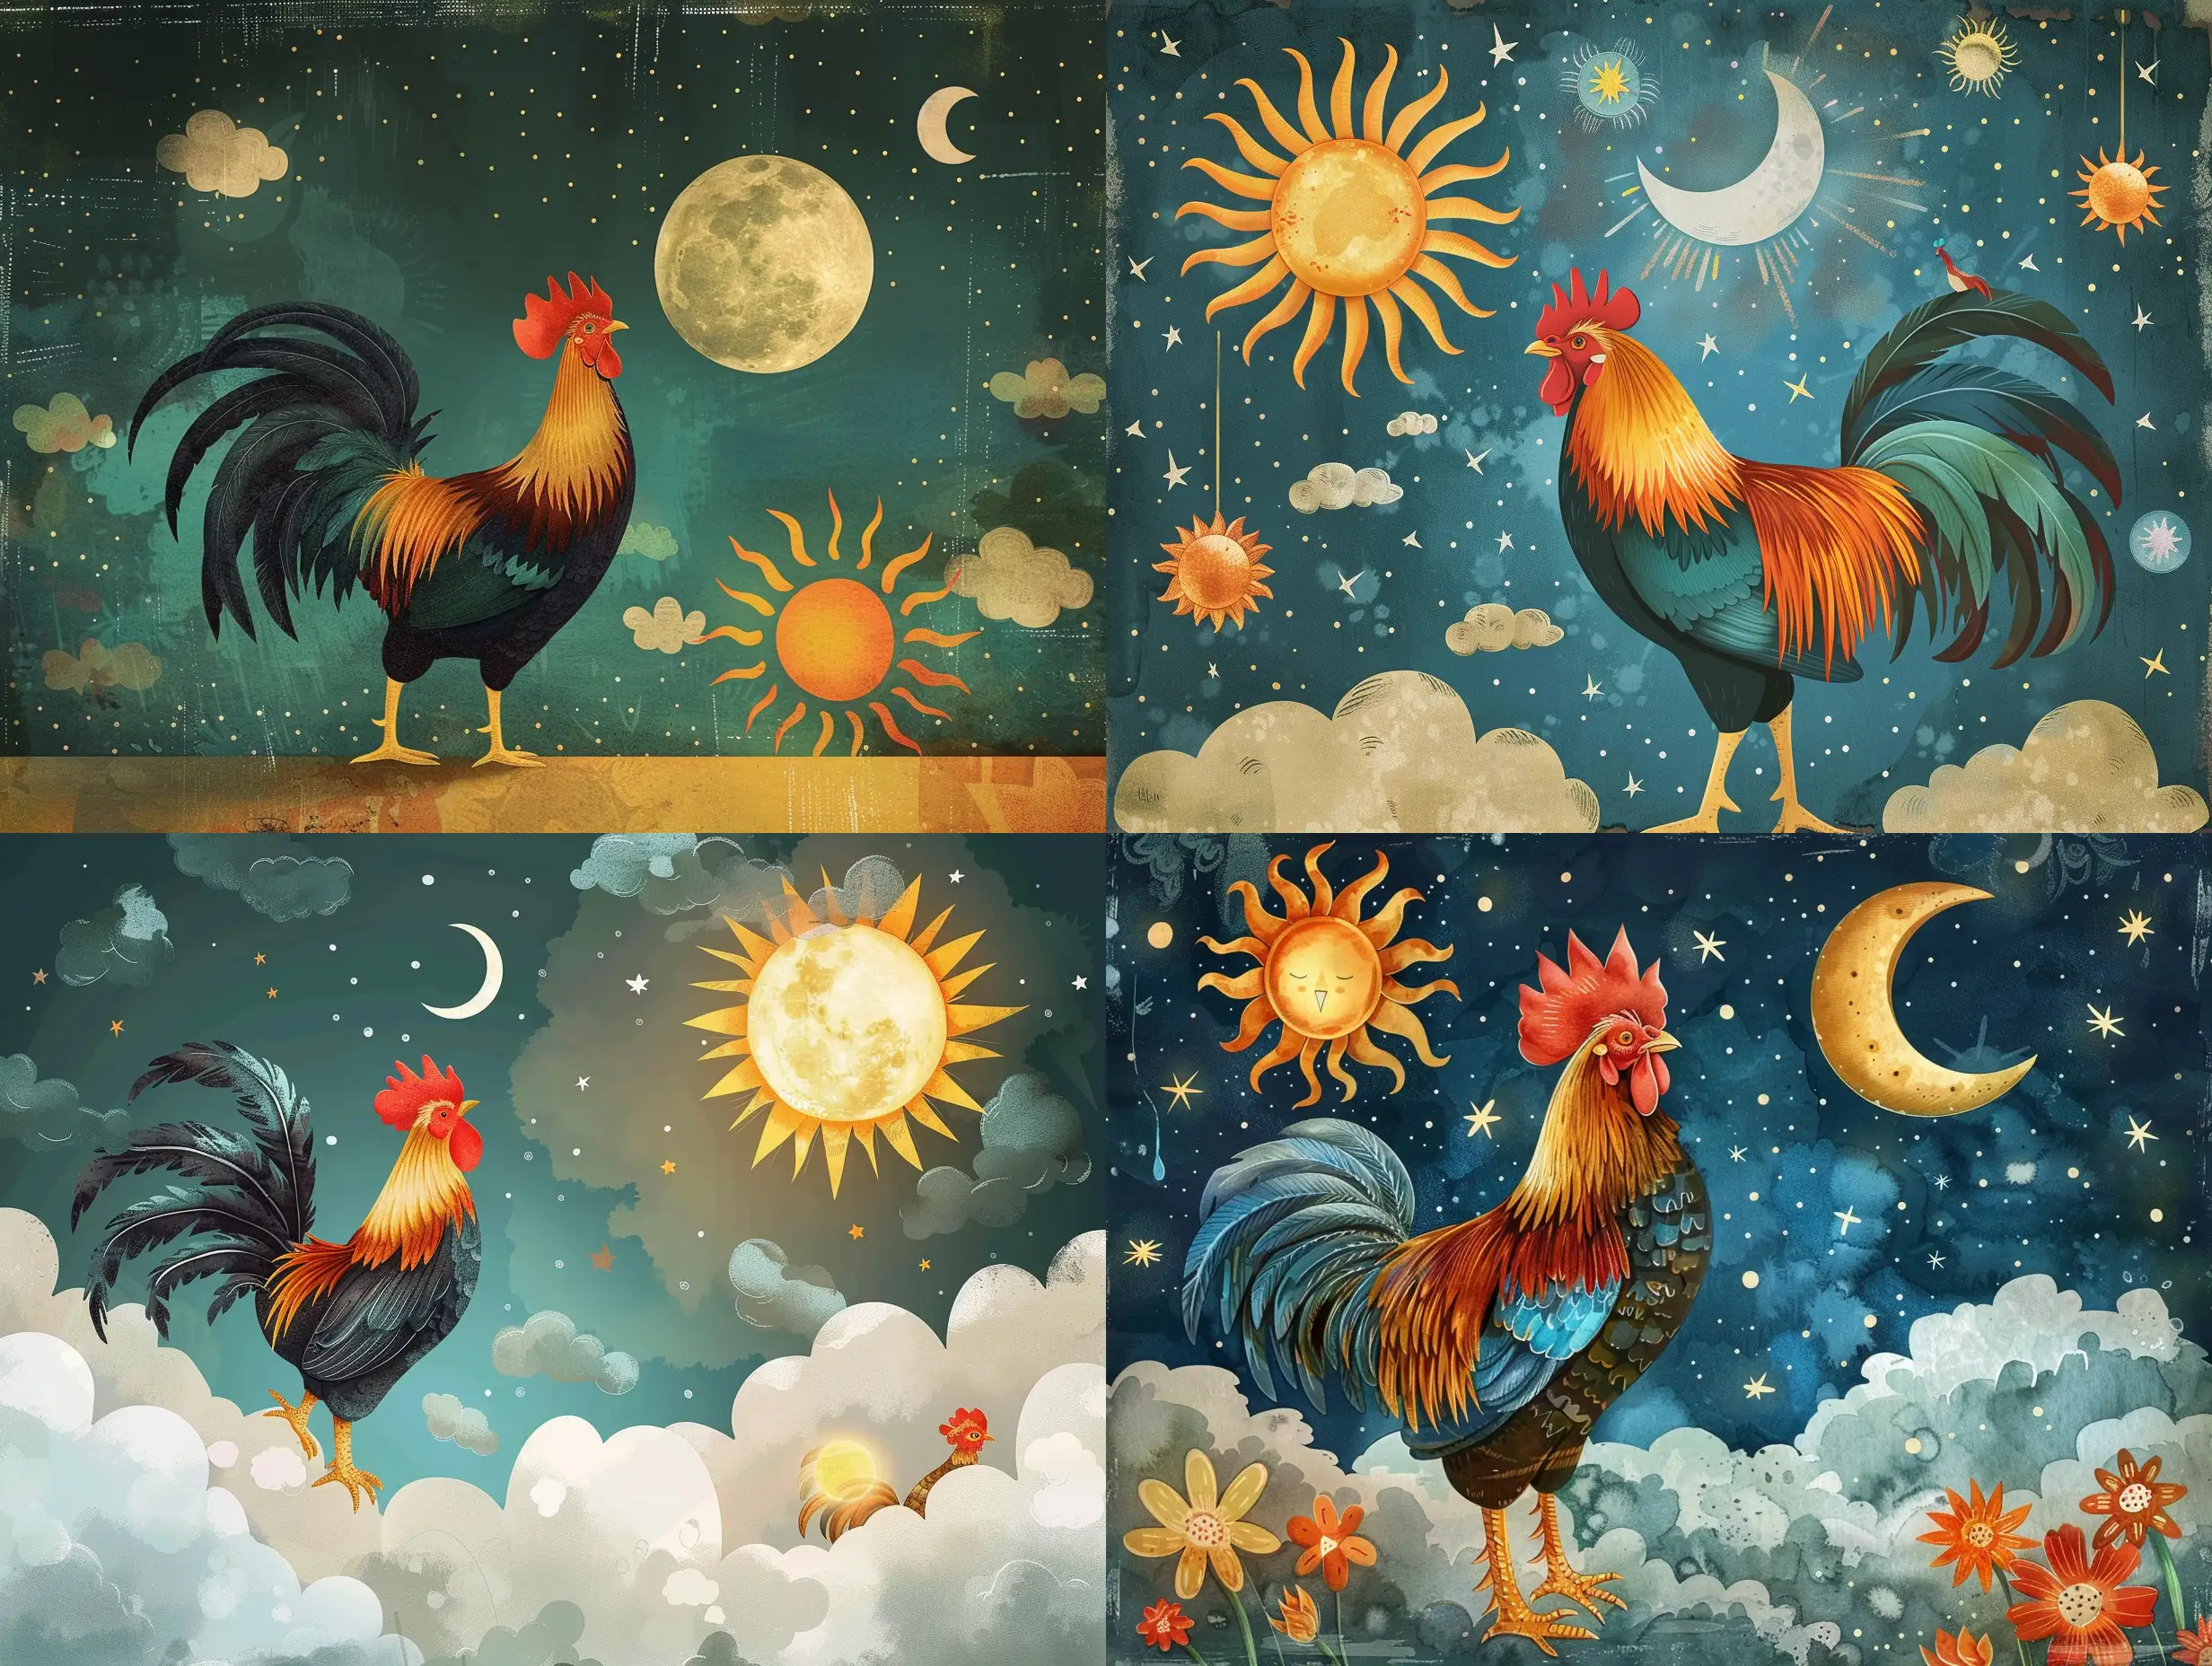 Illustration like fairytale about the rooster, moon ams sun in the sky 